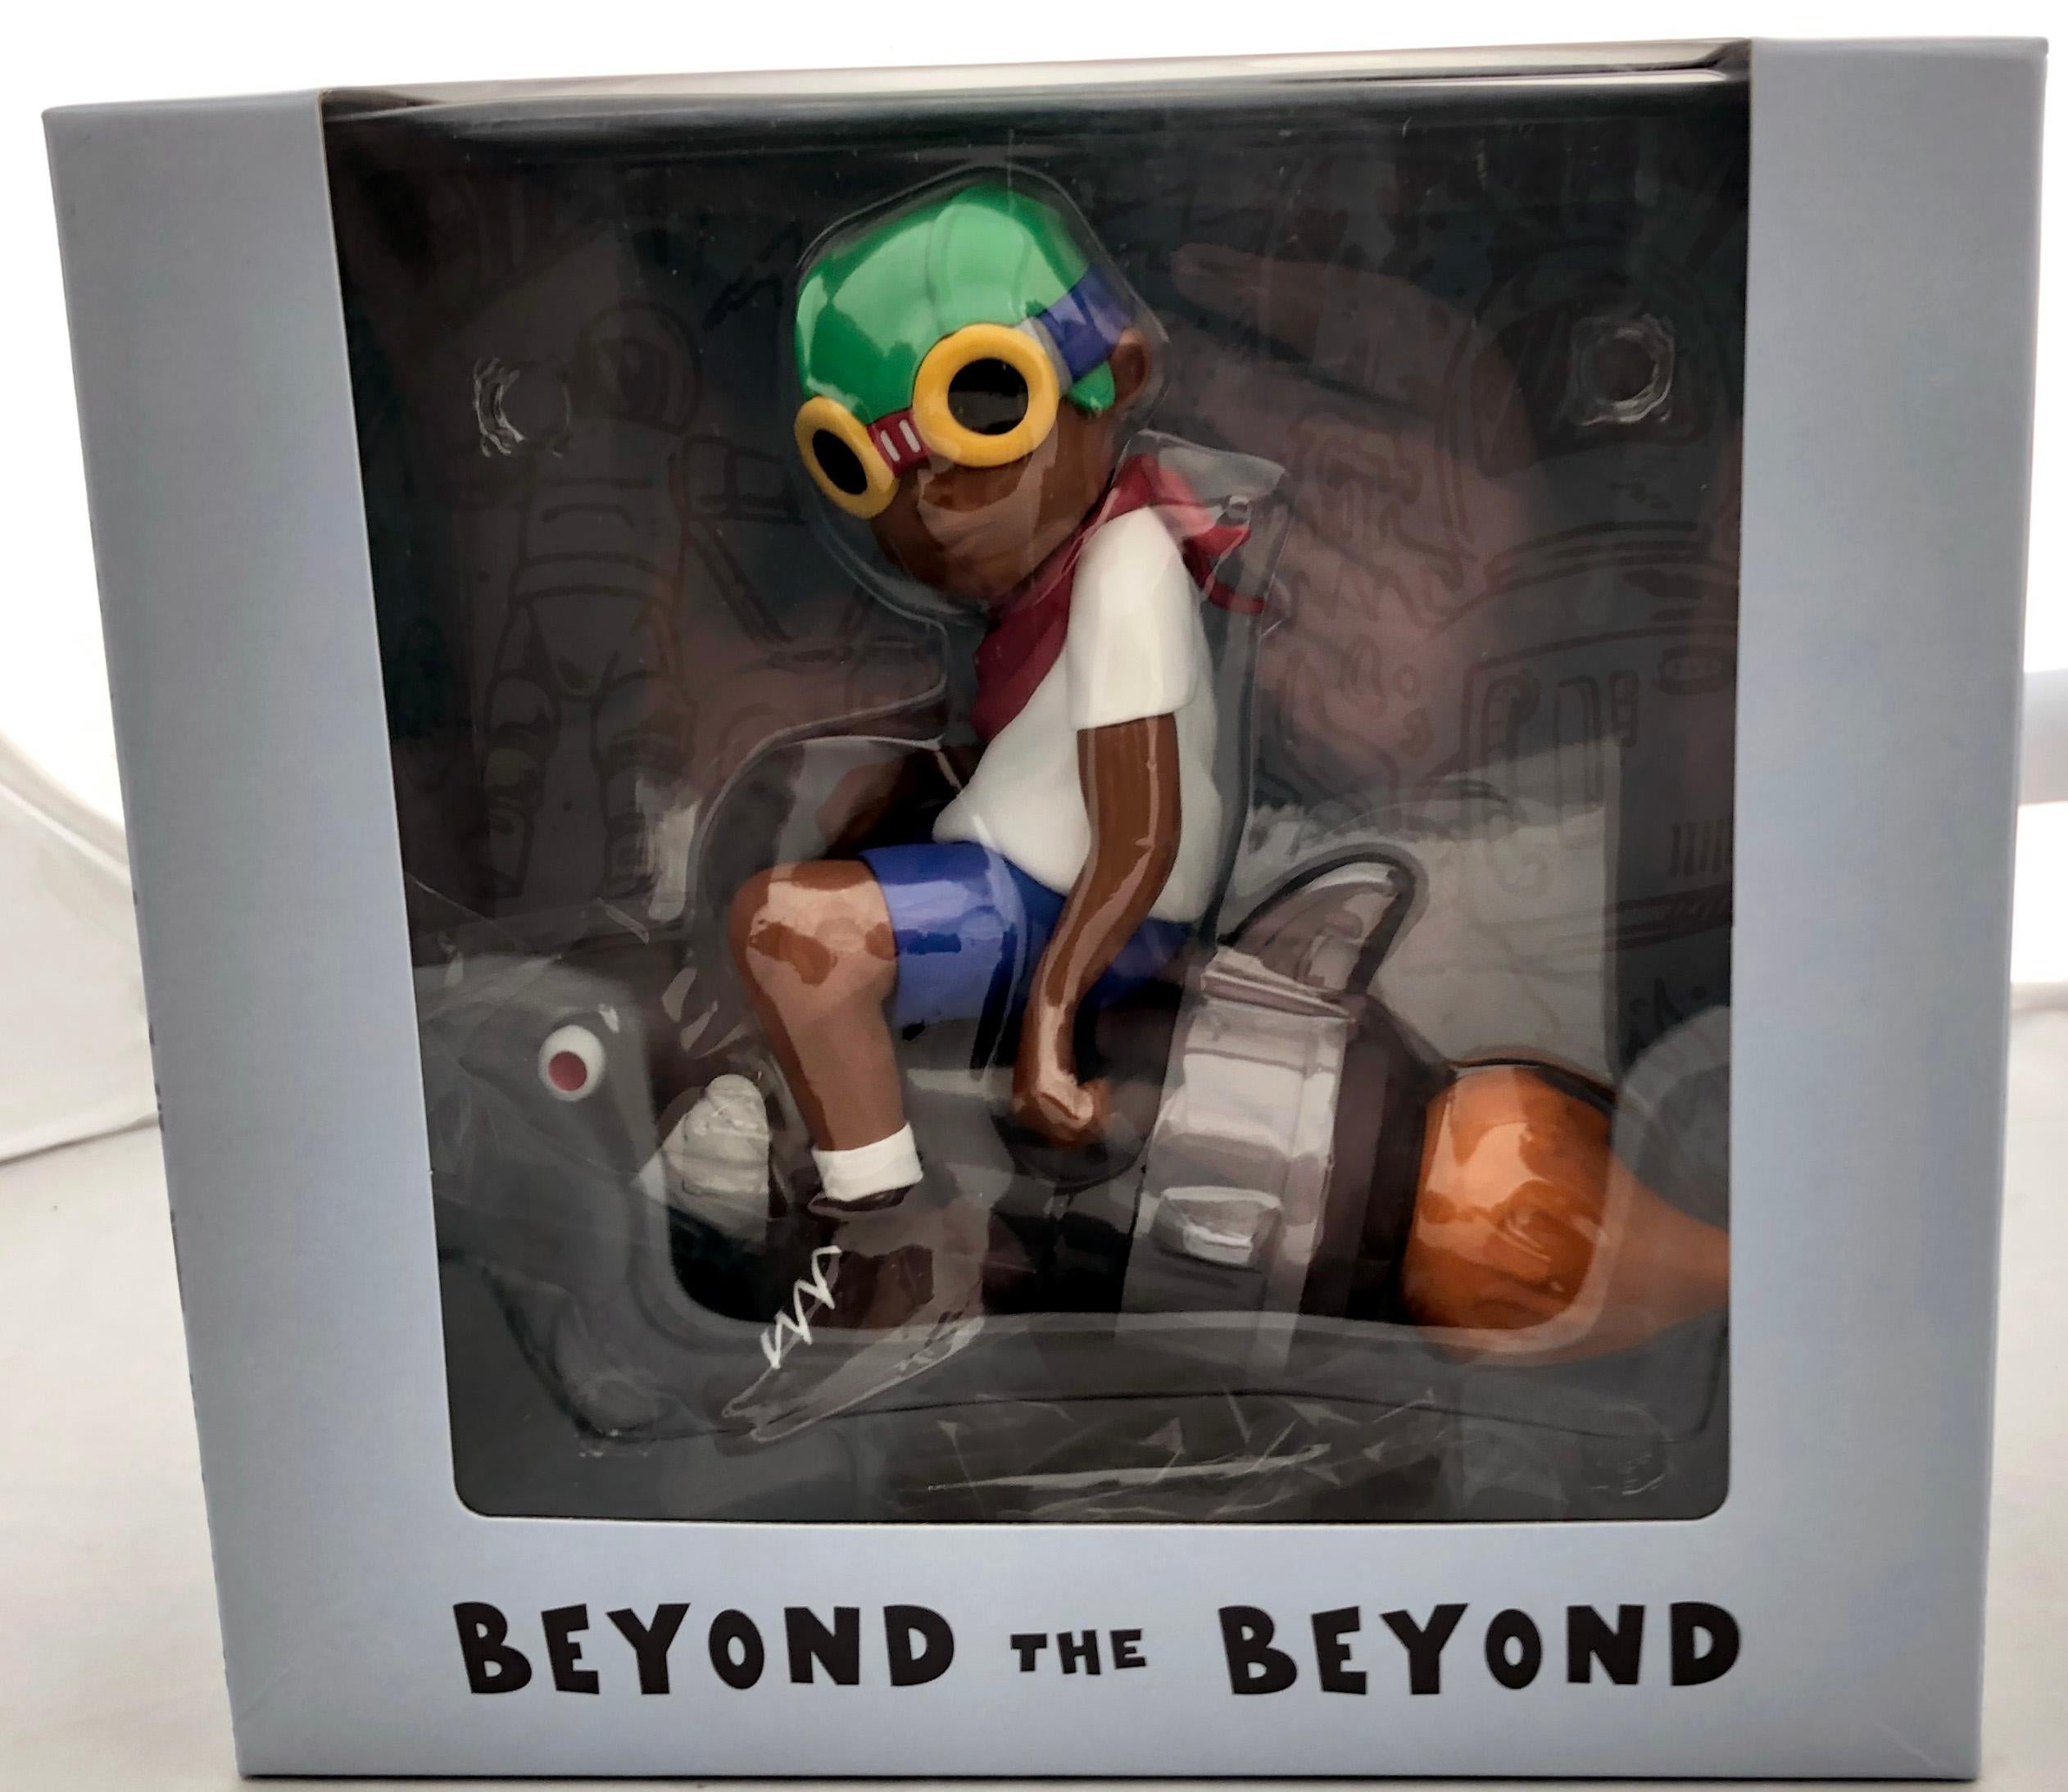 Hebru Brantley Flyboy, 2018. New in its original packaging.

Medium: Painted cast vinyl. 
Dimensions: 9 x 8 x 4 inches (22.9 x 20.3 x 10.2 cm). 
New and sealed in its original packaging.
From a sold out edition of unknown; published by Hebru